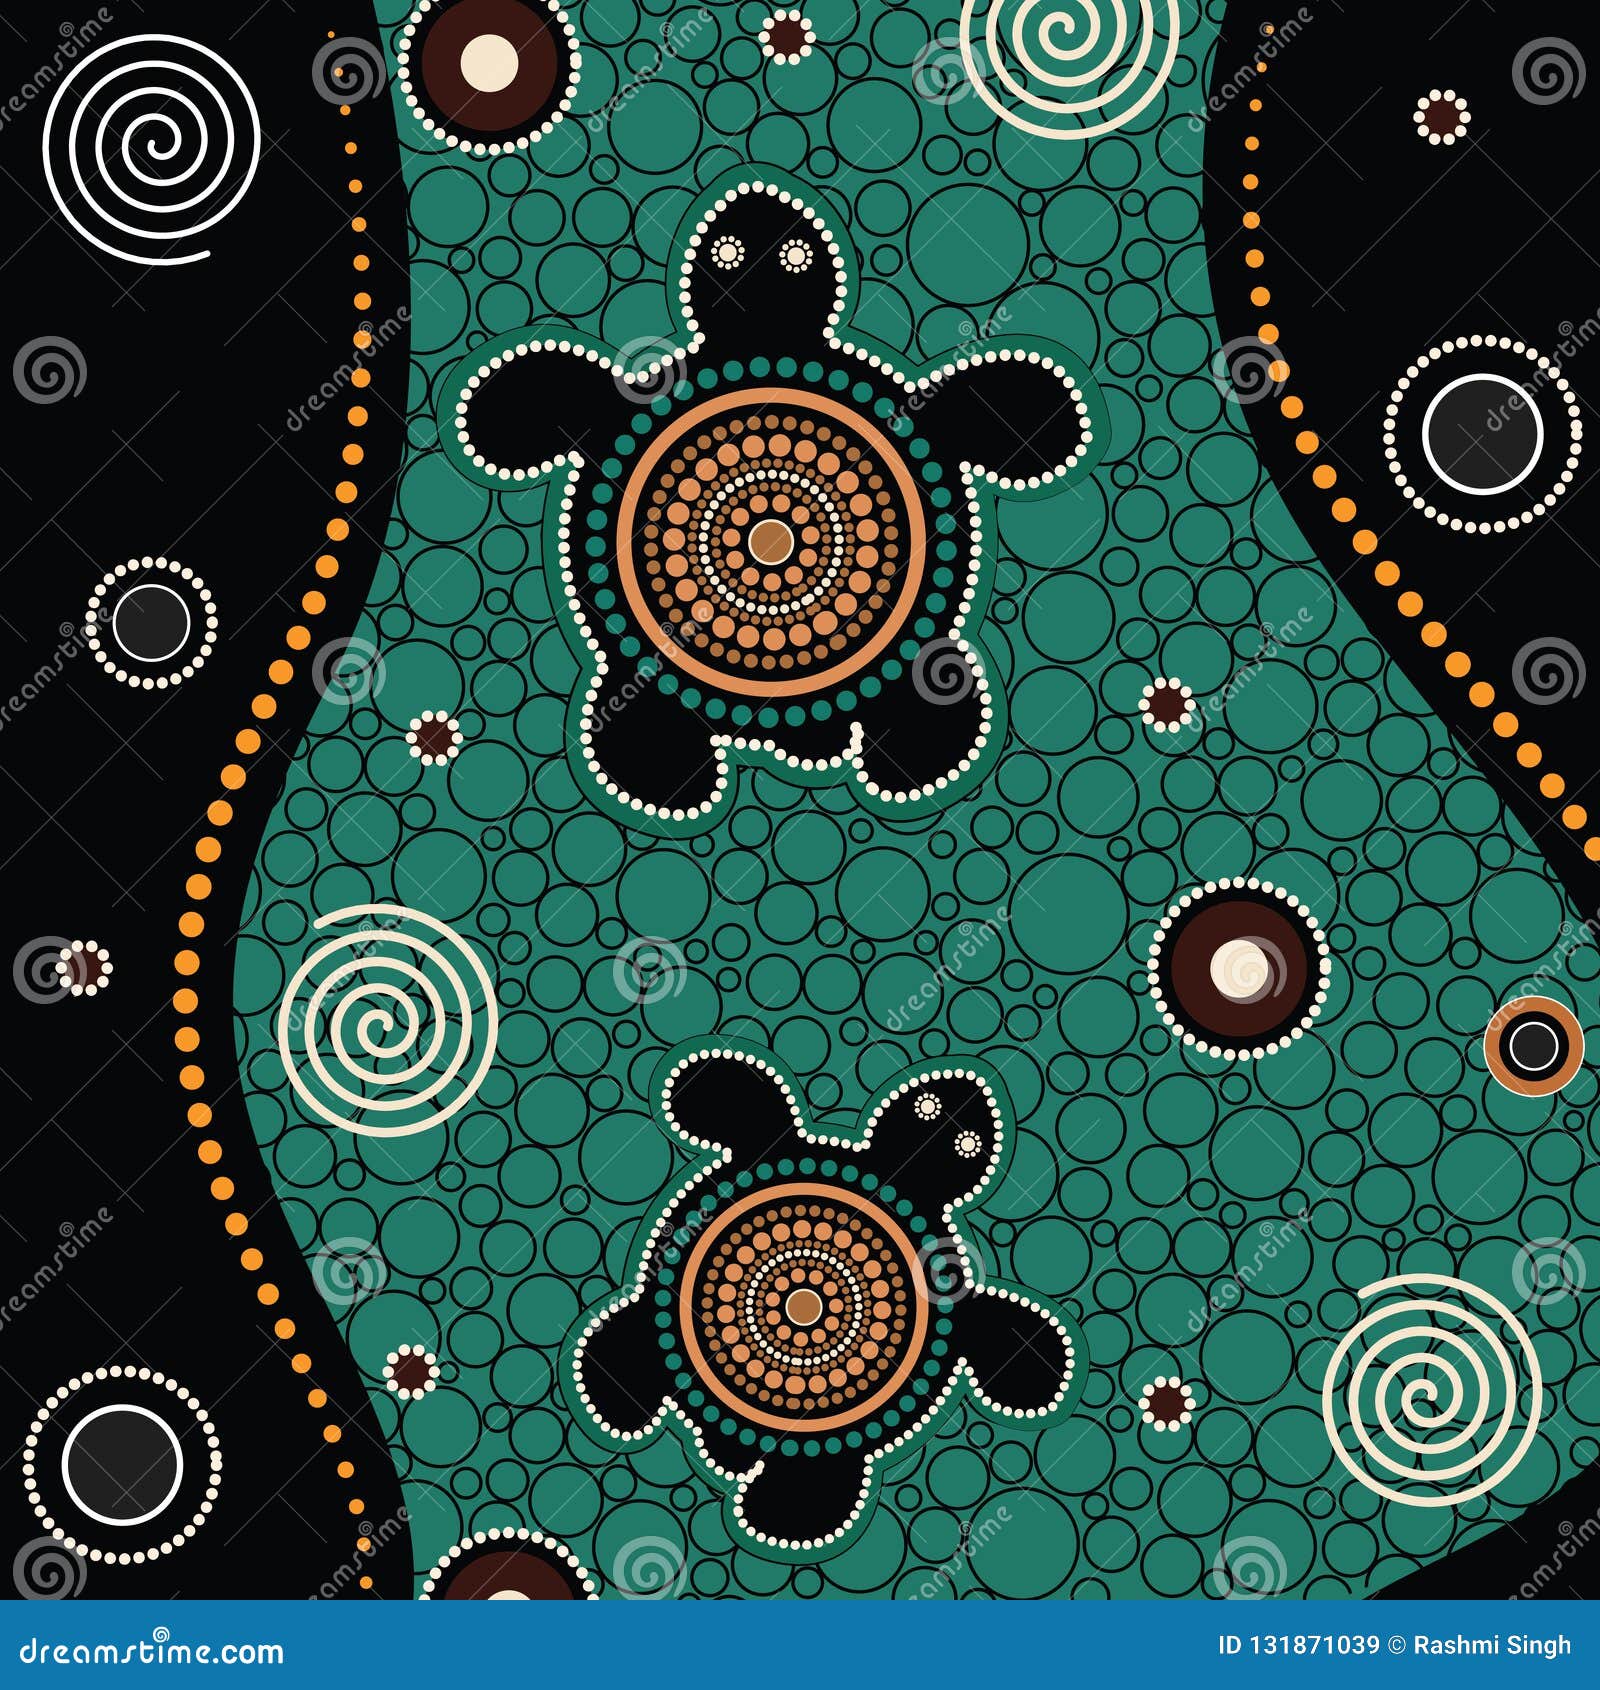 Aboriginal Dot Painting Stock Illustrations 3 468 Aboriginal Dot Painting Stock Illustrations Vectors Clipart Dreamstime